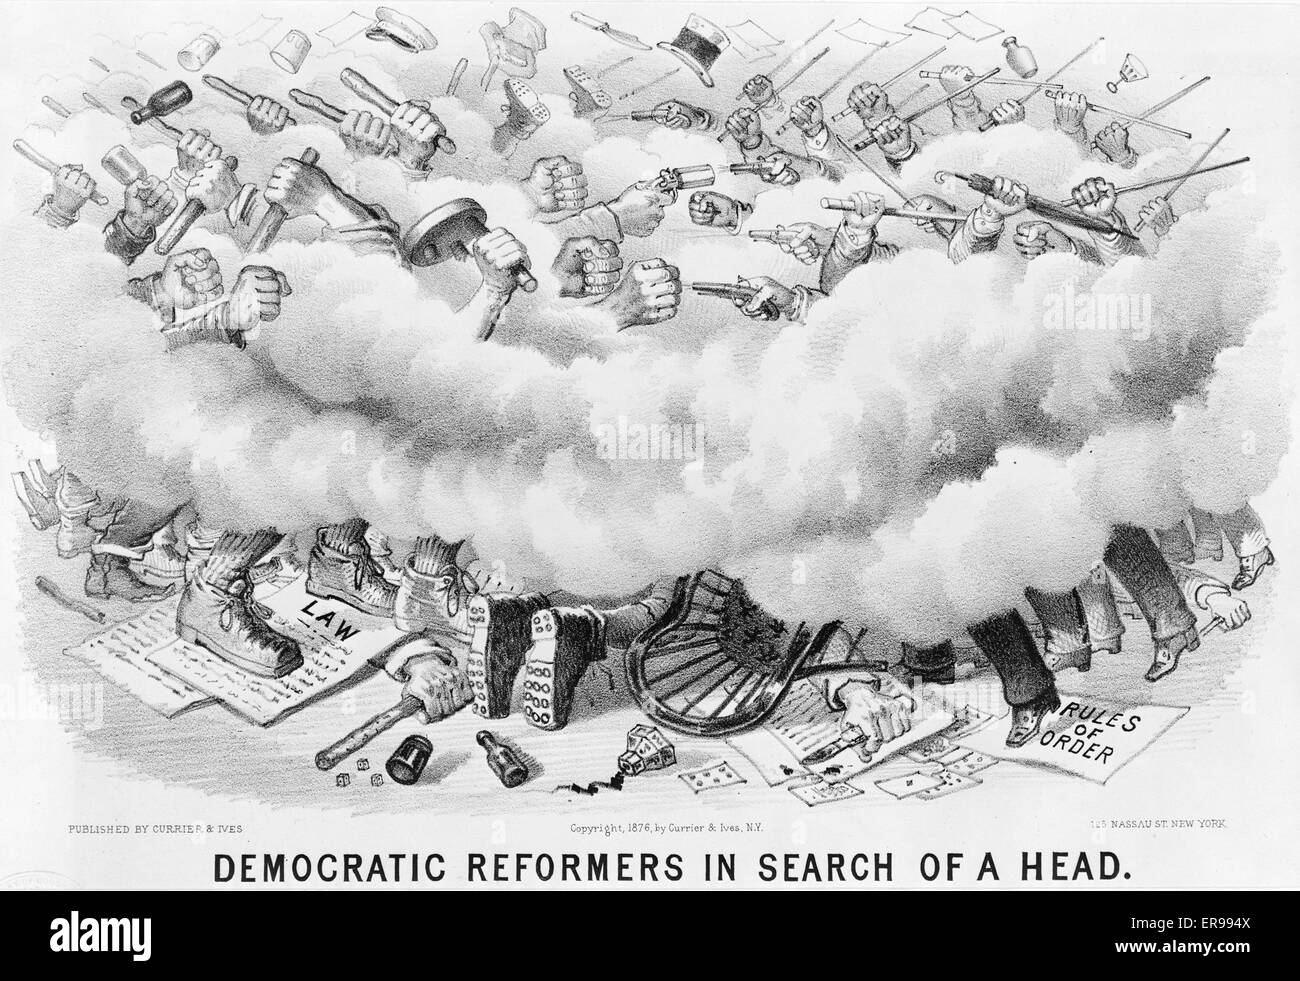 Democratic reformers in search of a head Stock Photo